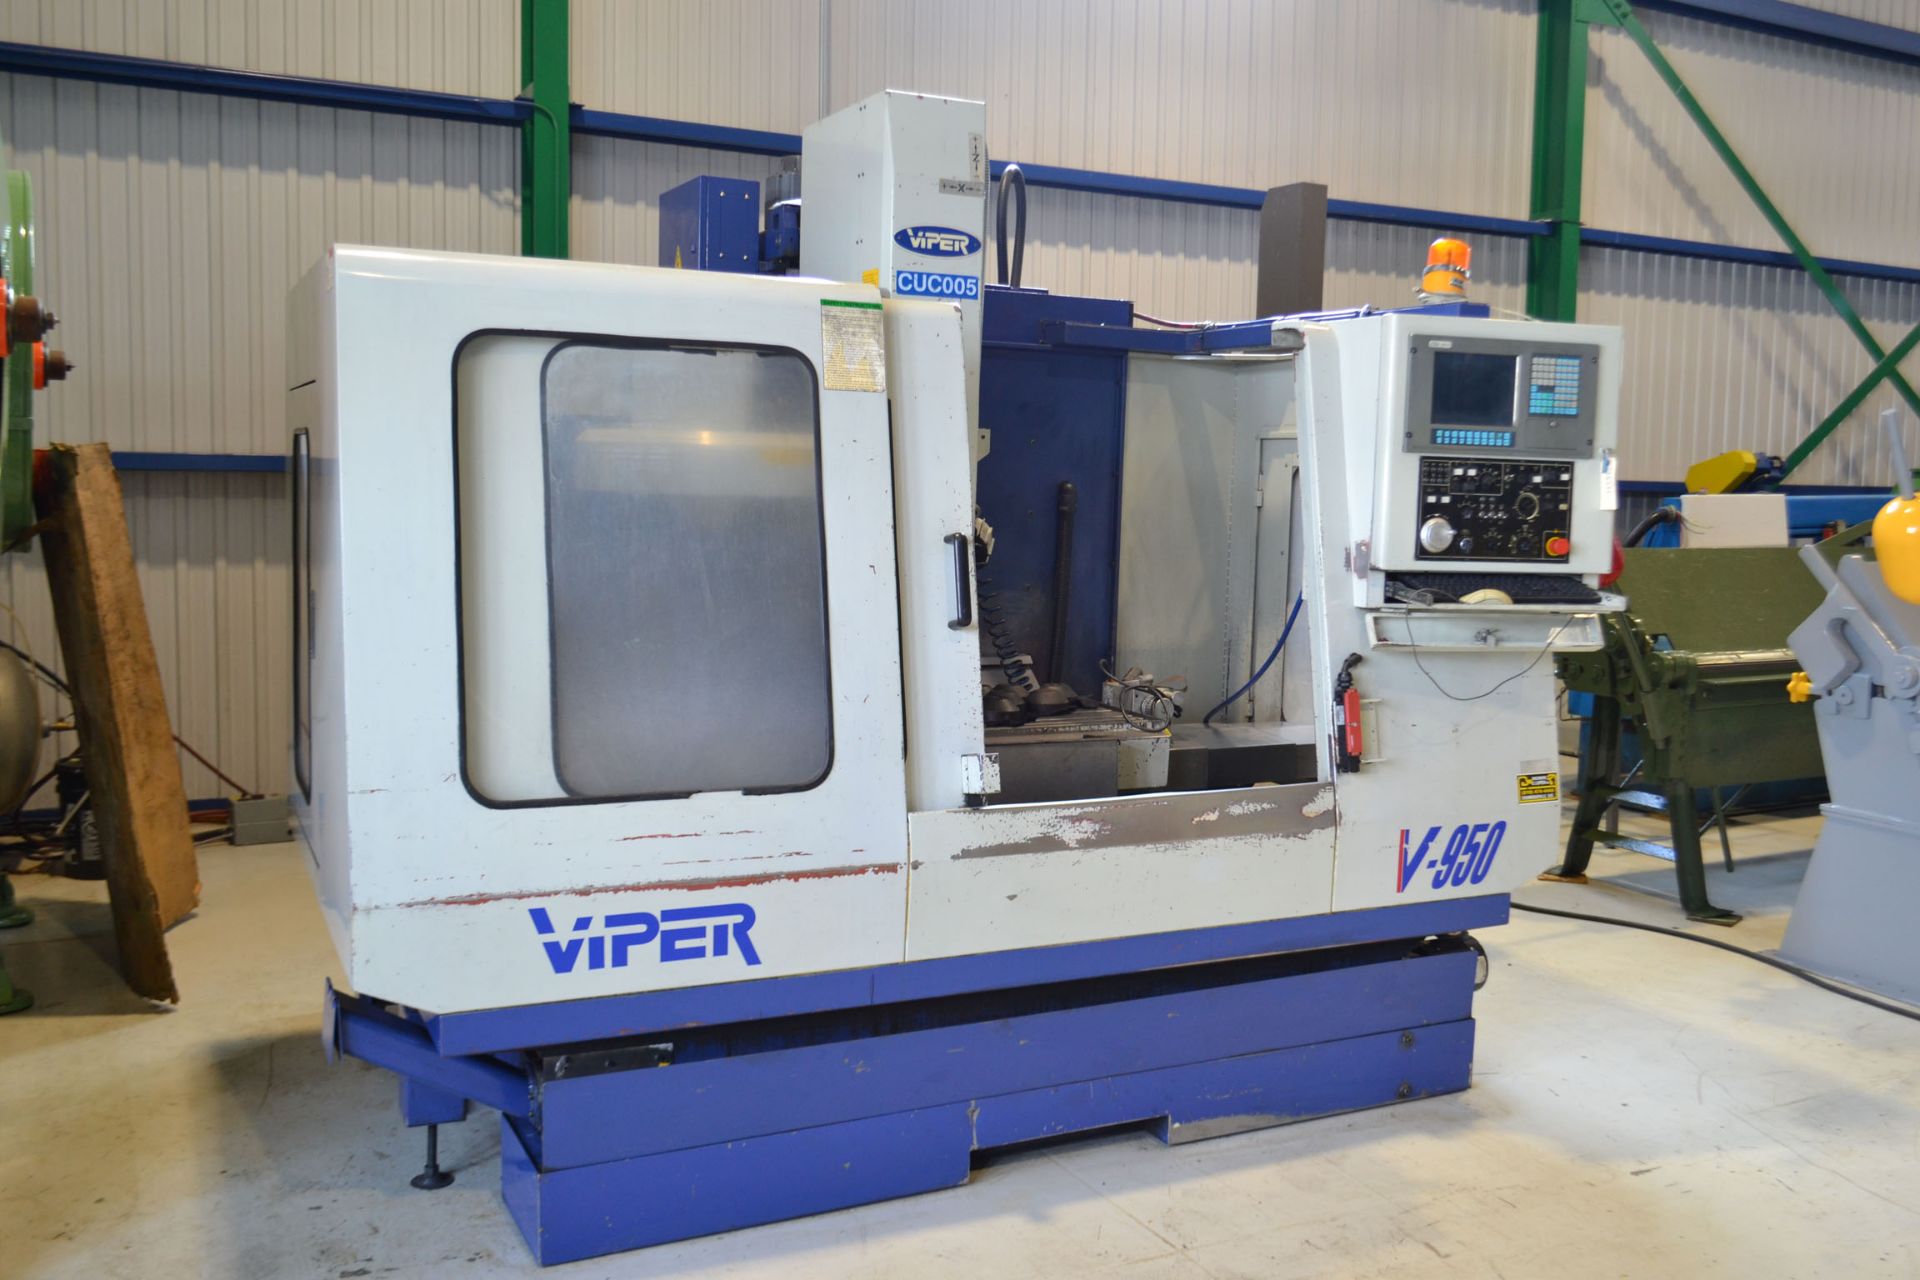 MIGHTY VIPER V950 3-AXIS VERTICAL MACHINING CENTER - LOCATION: MONTREAL, QUEBEC